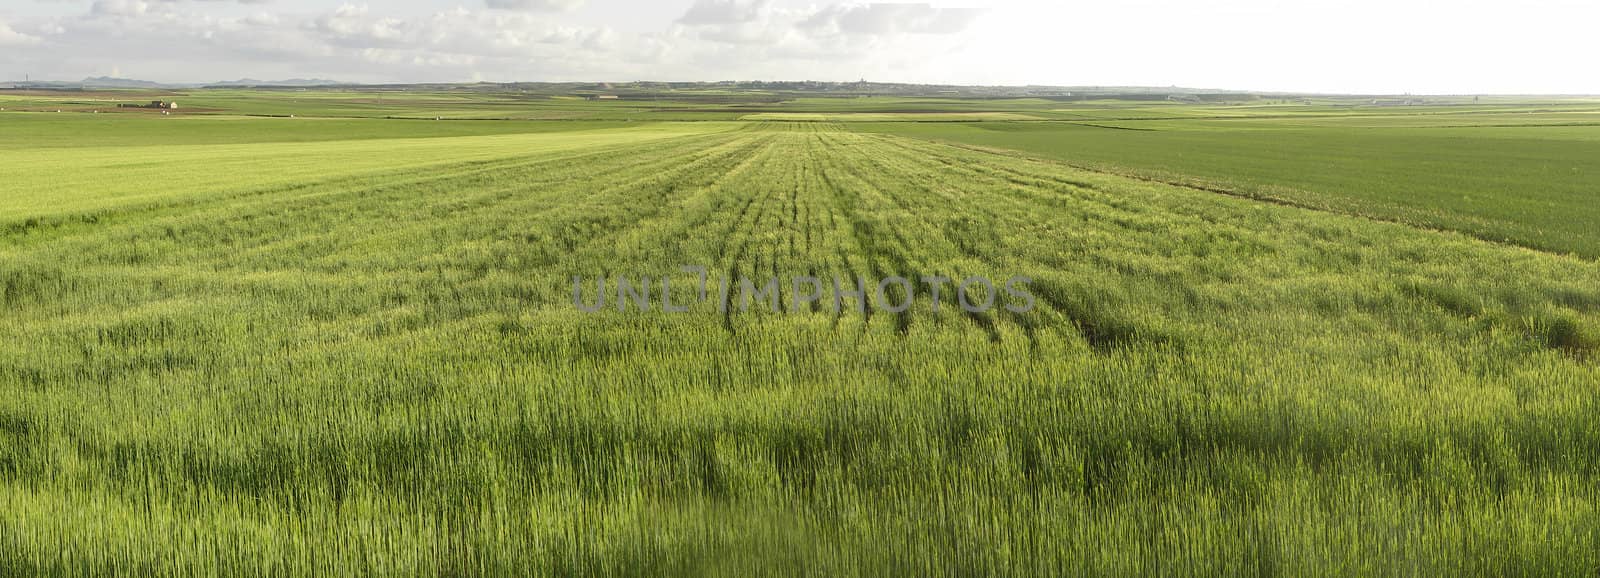 A large view of a cultivated field